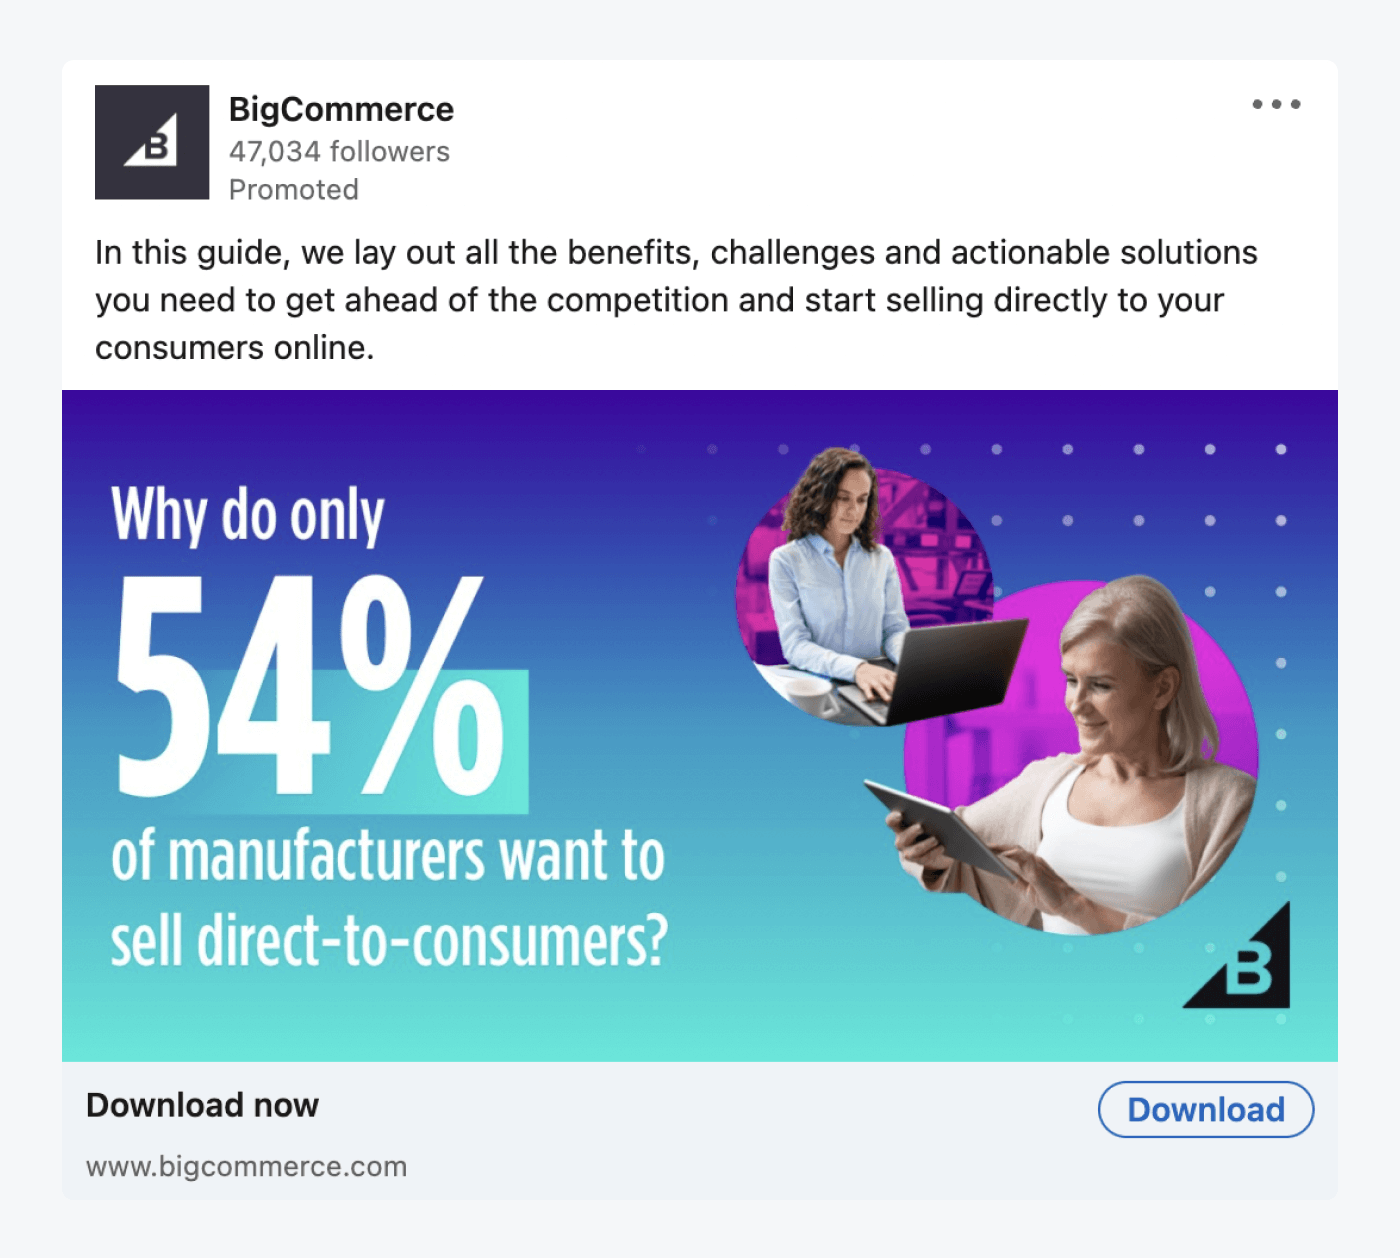 BigCommerce advertised their original research example